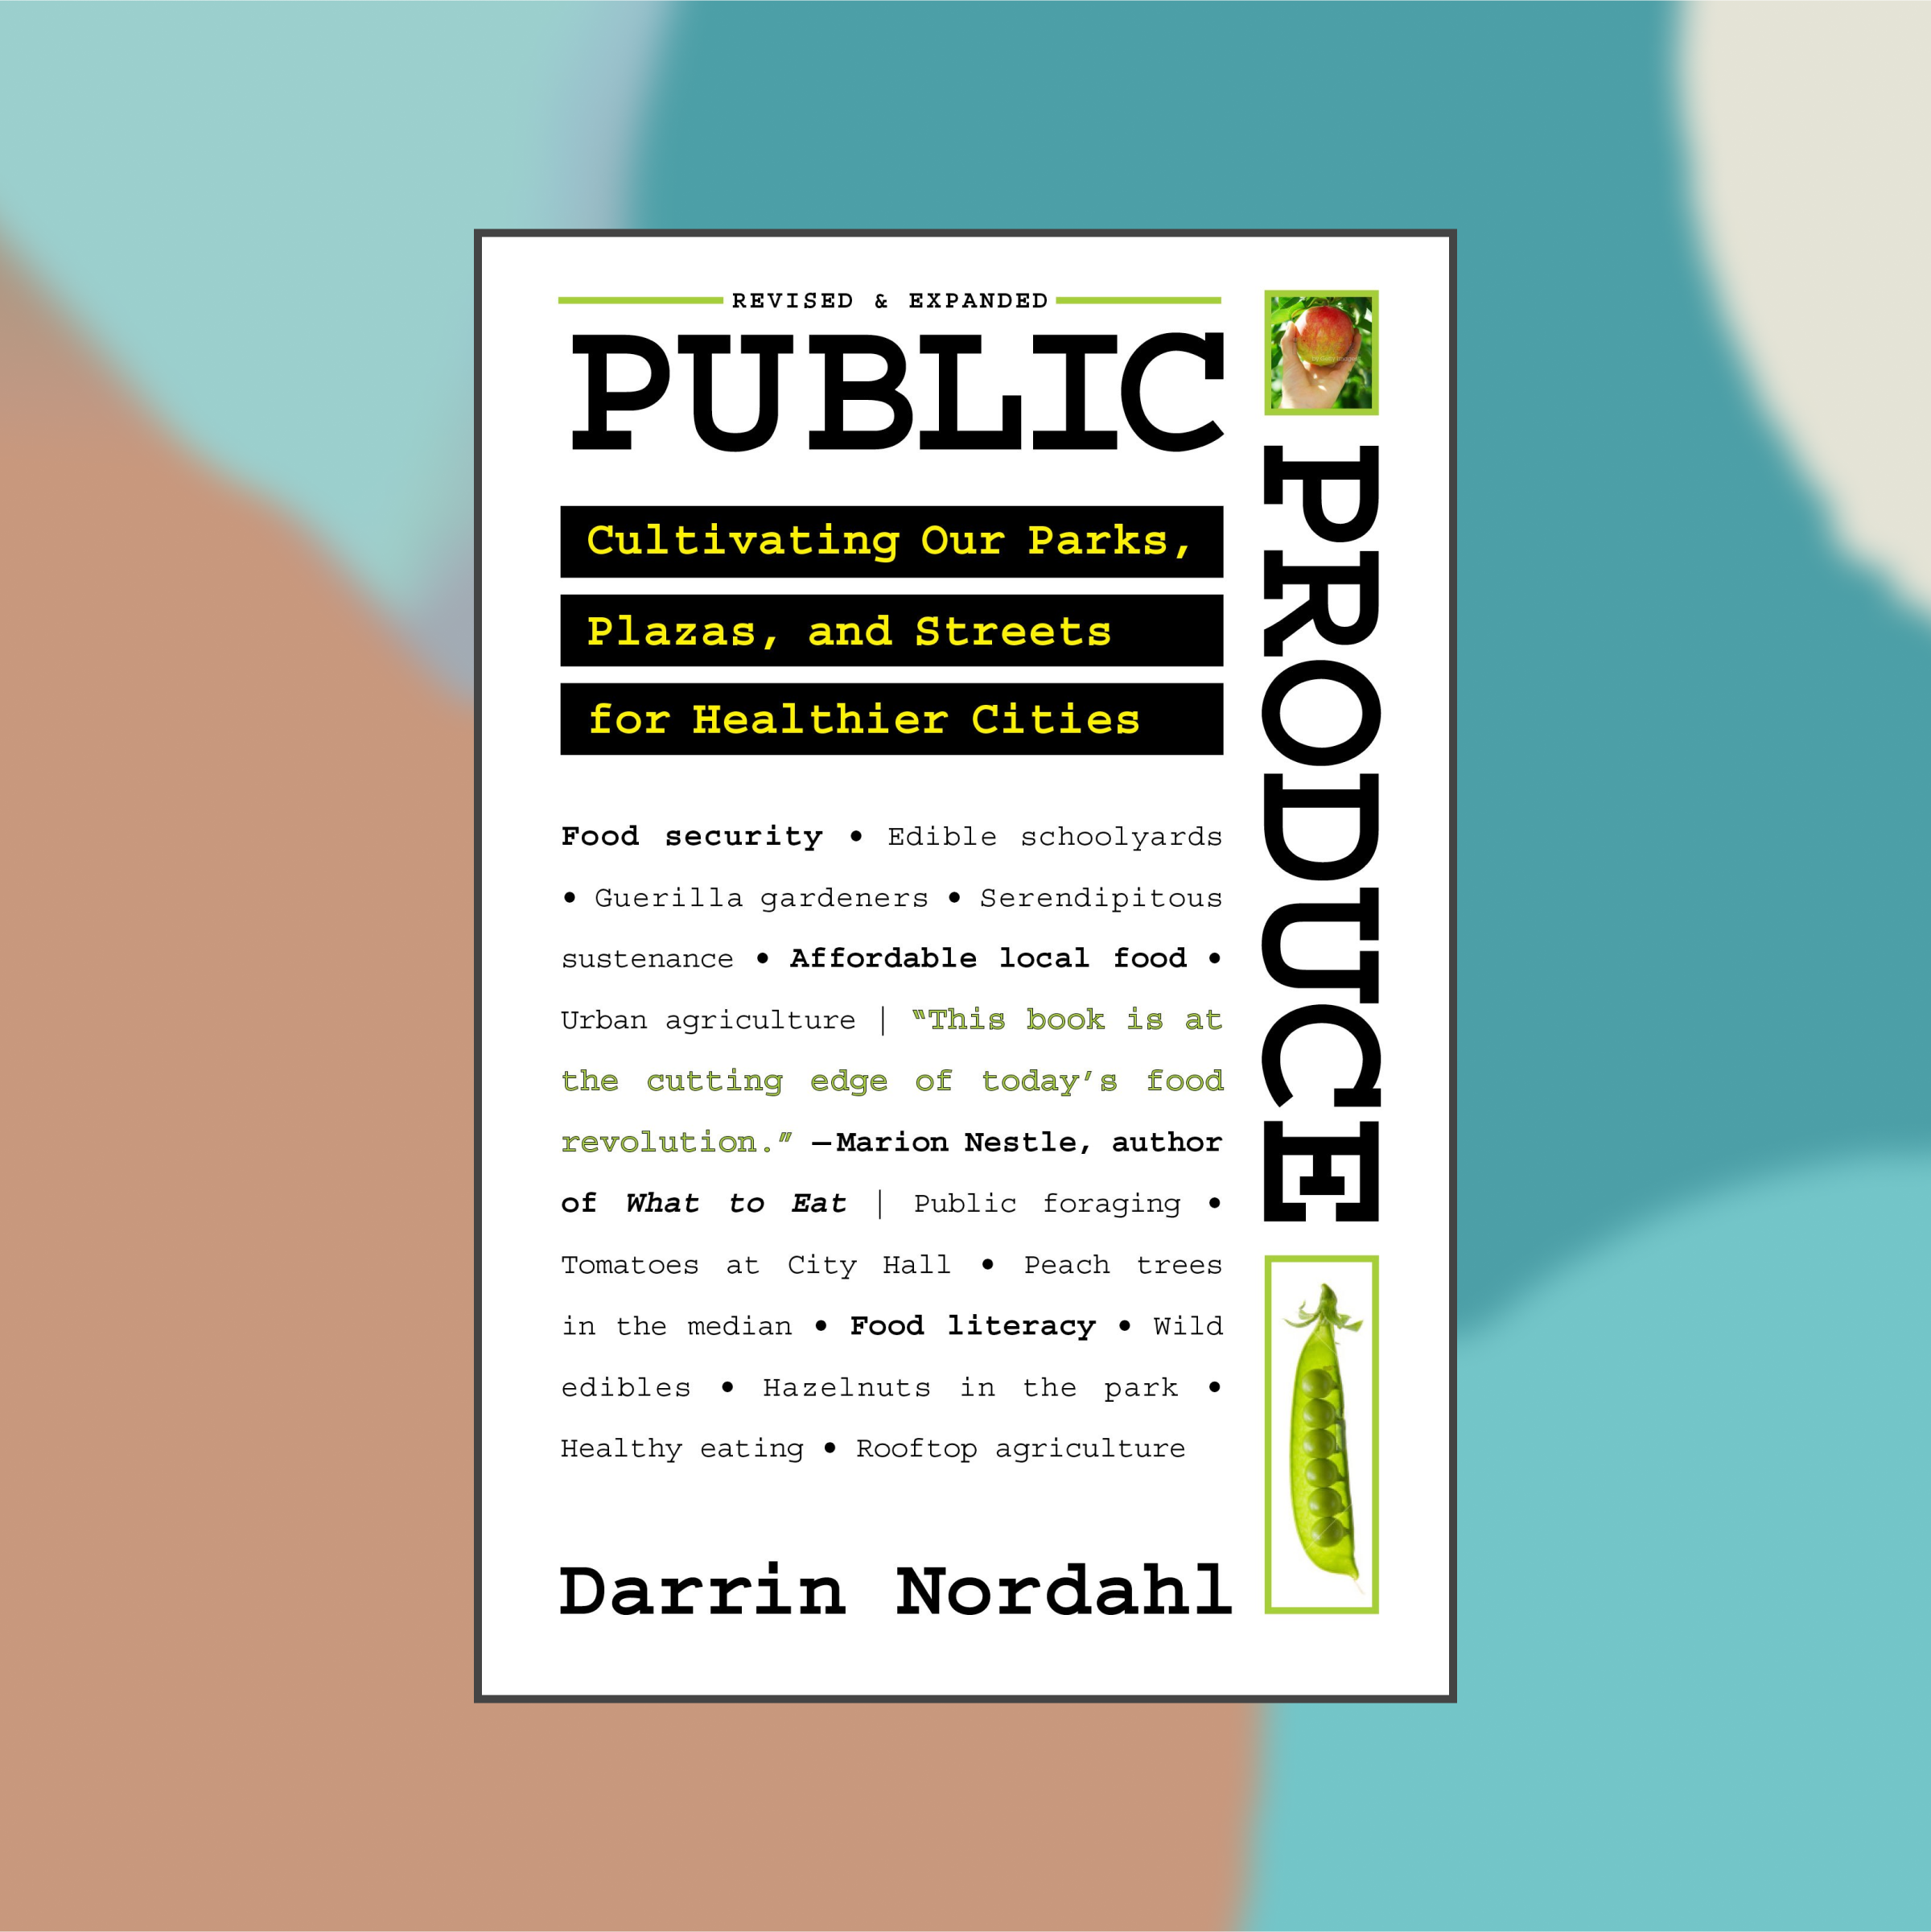 Book cover of Public Produce against an abstract painted background